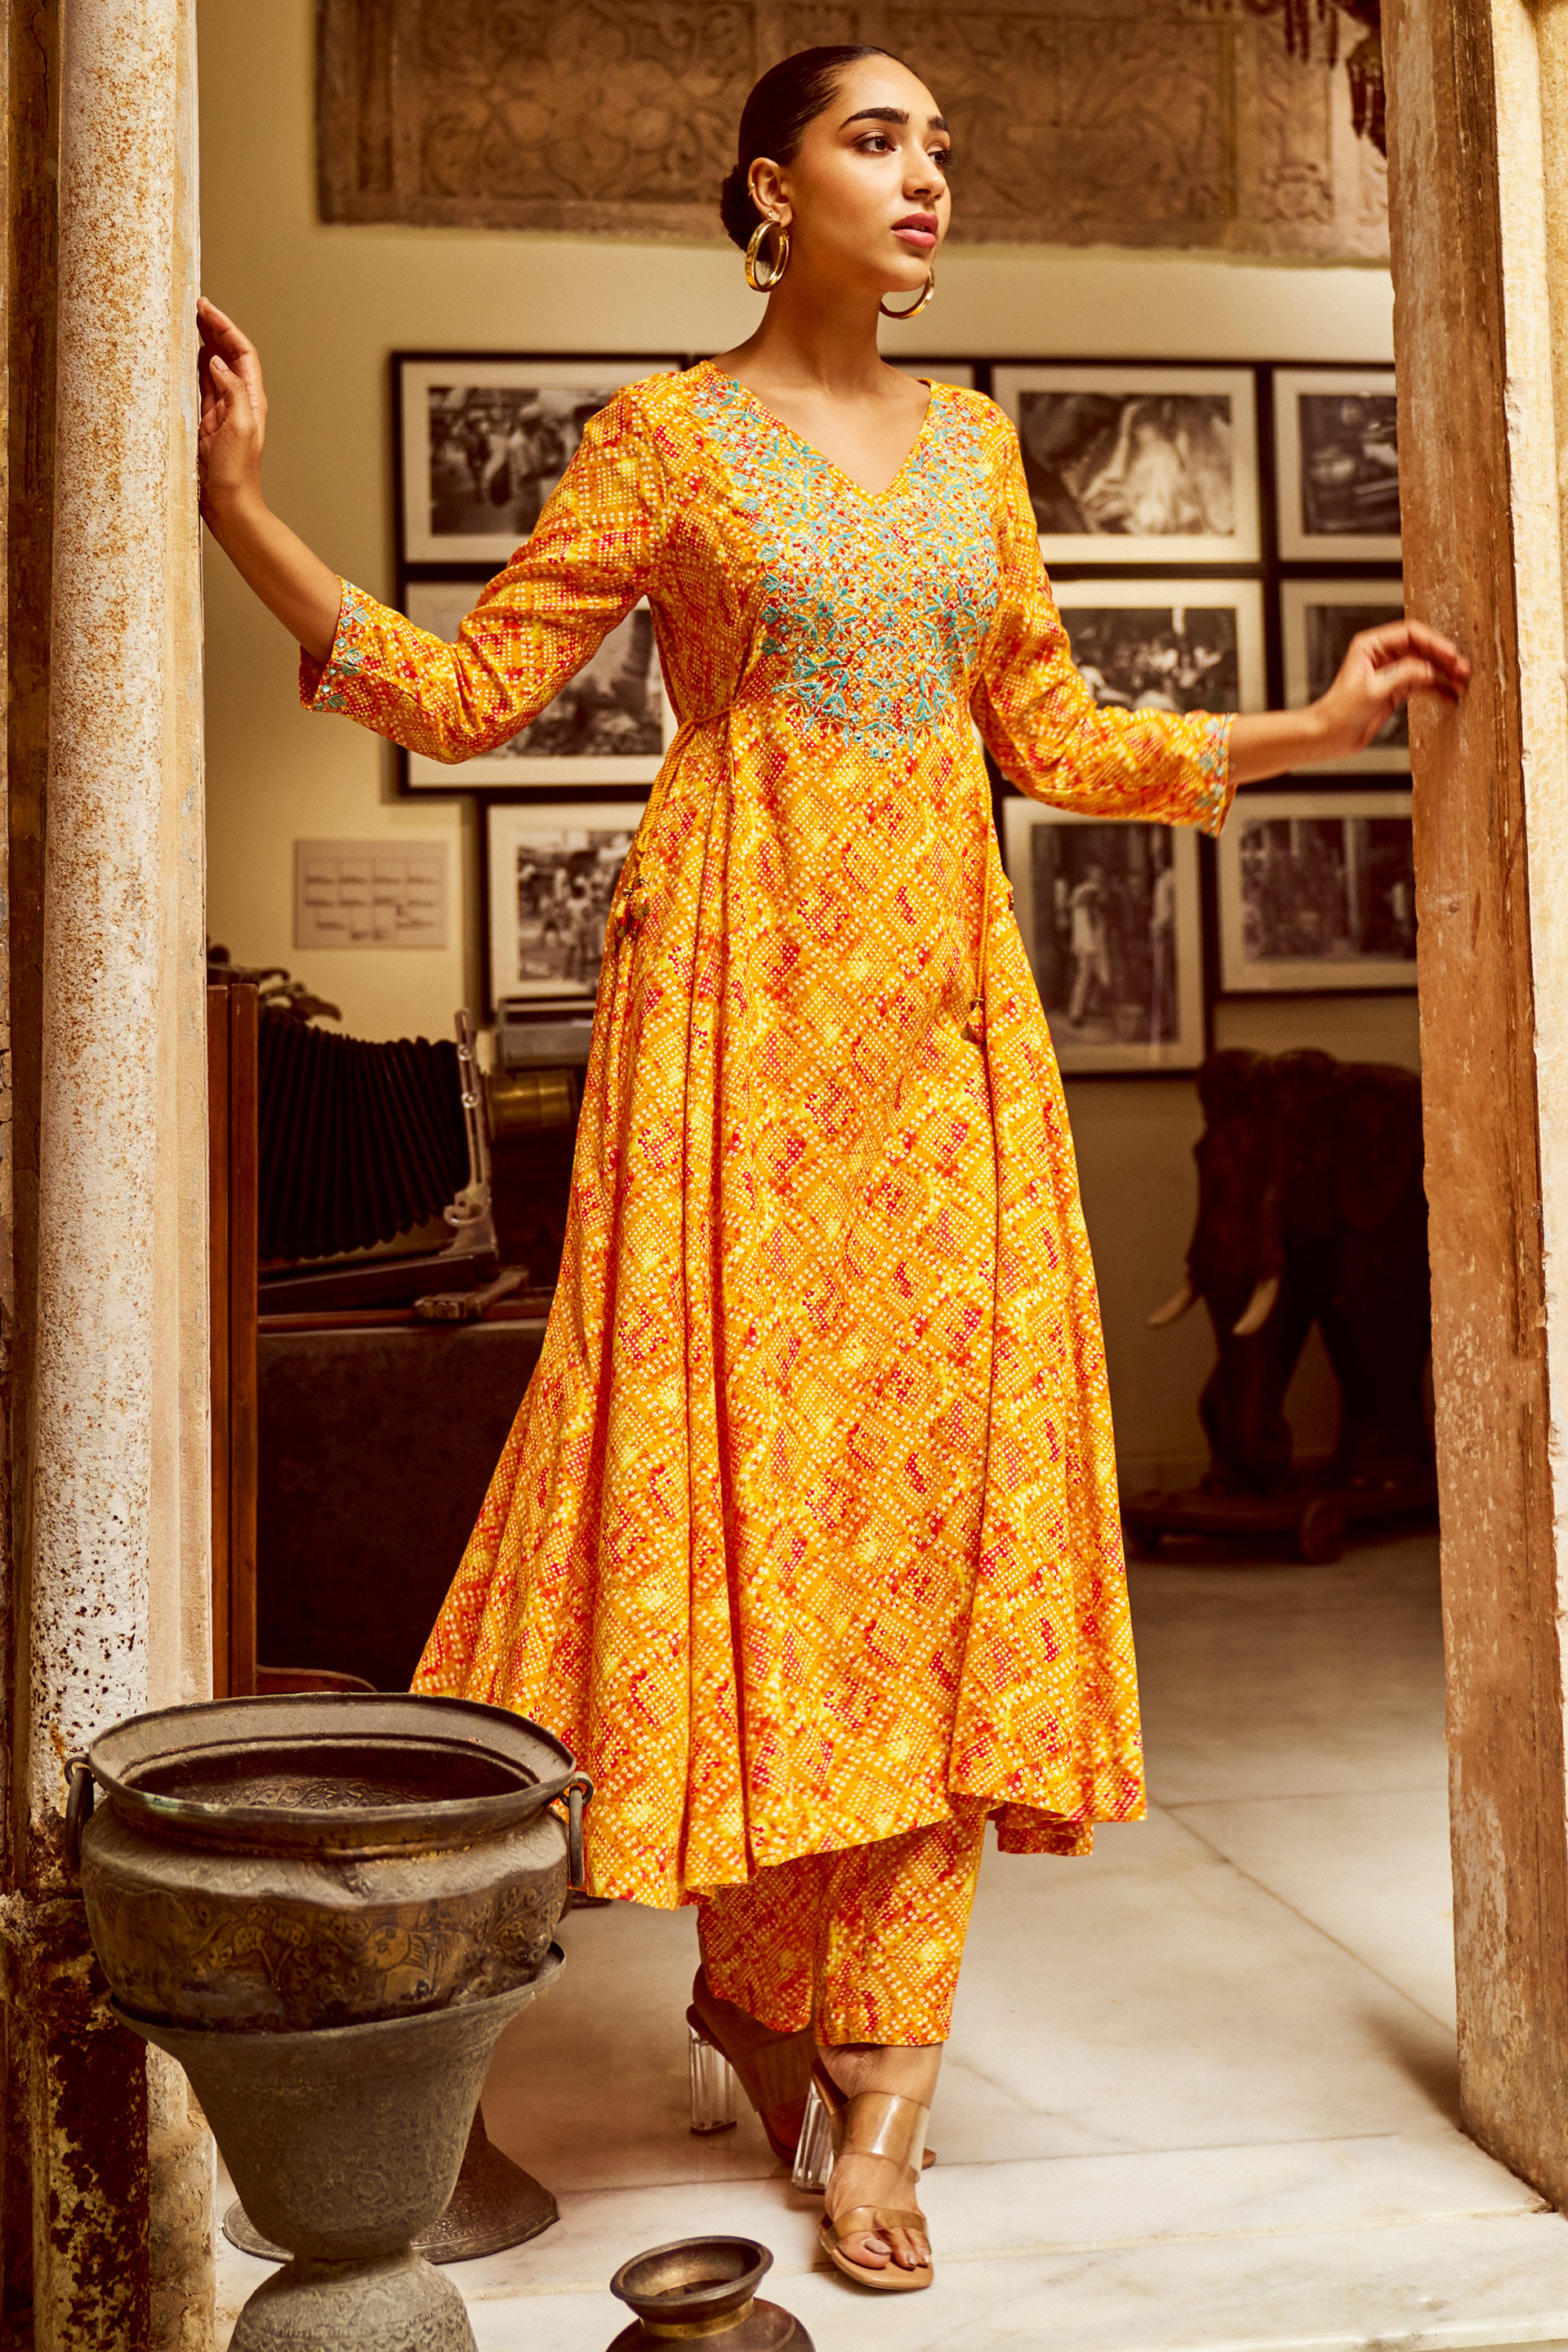 Shop the Latest Sale on Kurtis and Dresses for Women and Girls | Global Desi